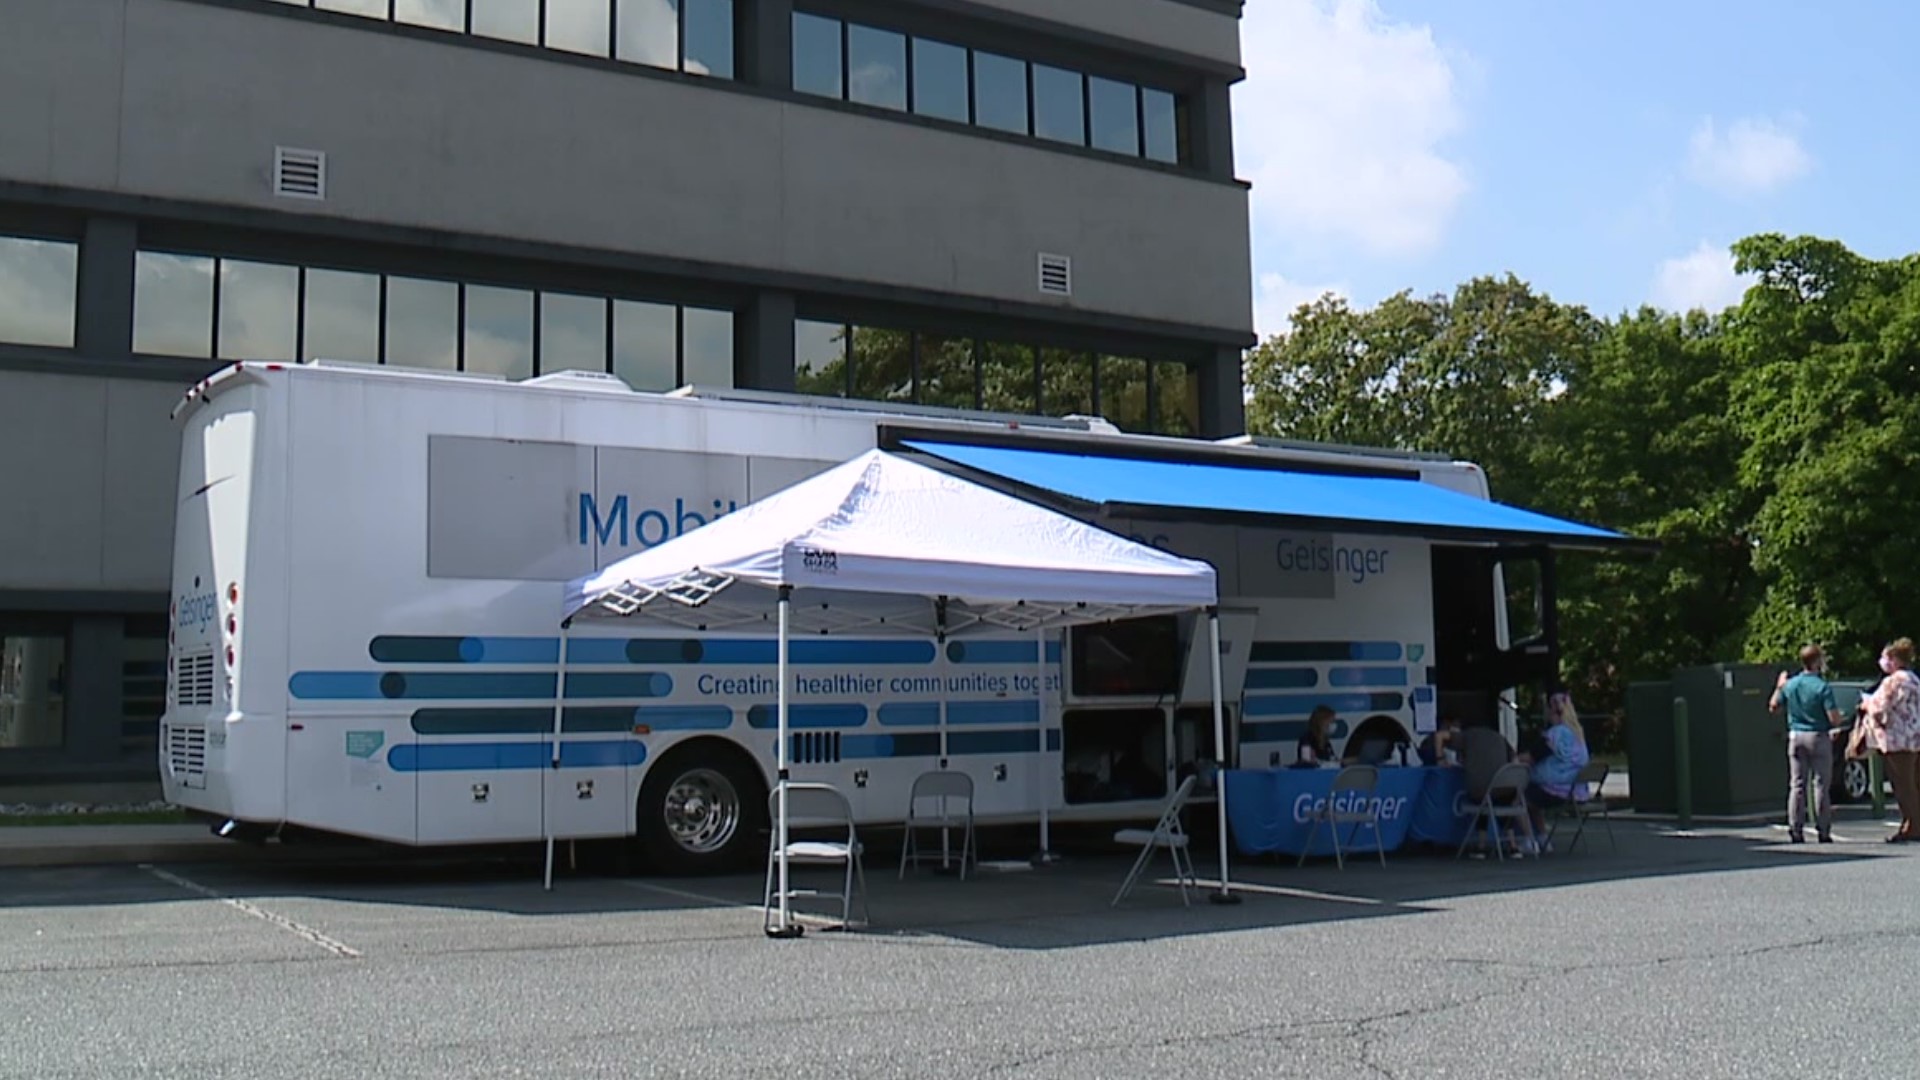 Buses full of wellness and primary care teams are offering services to help people better manage their health without having to go to the doctor's office.